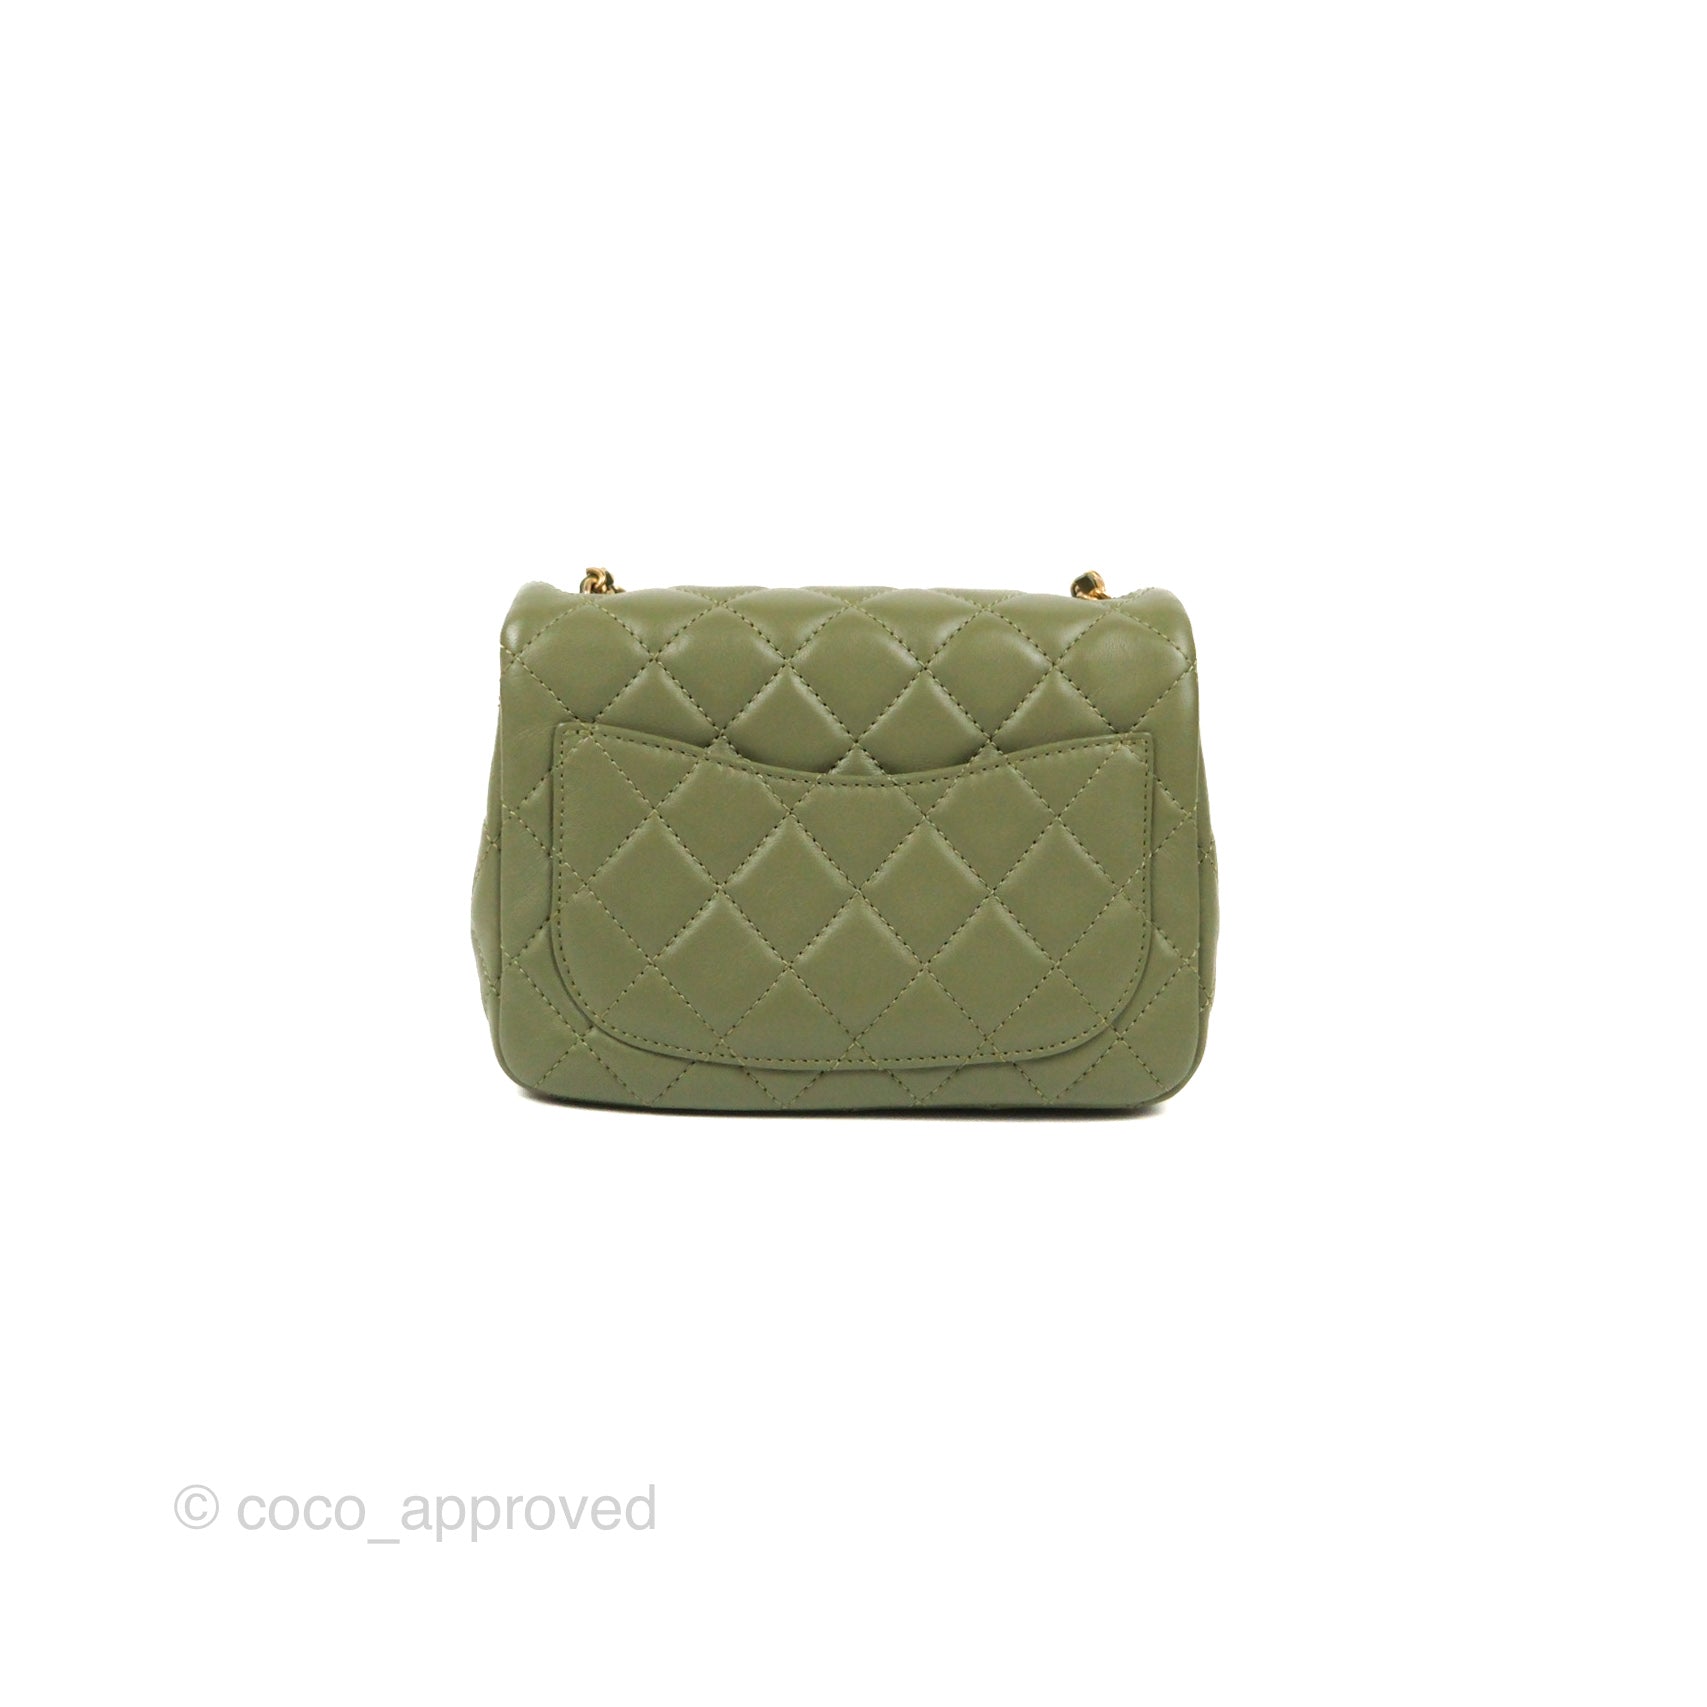 green chanel bag outfit